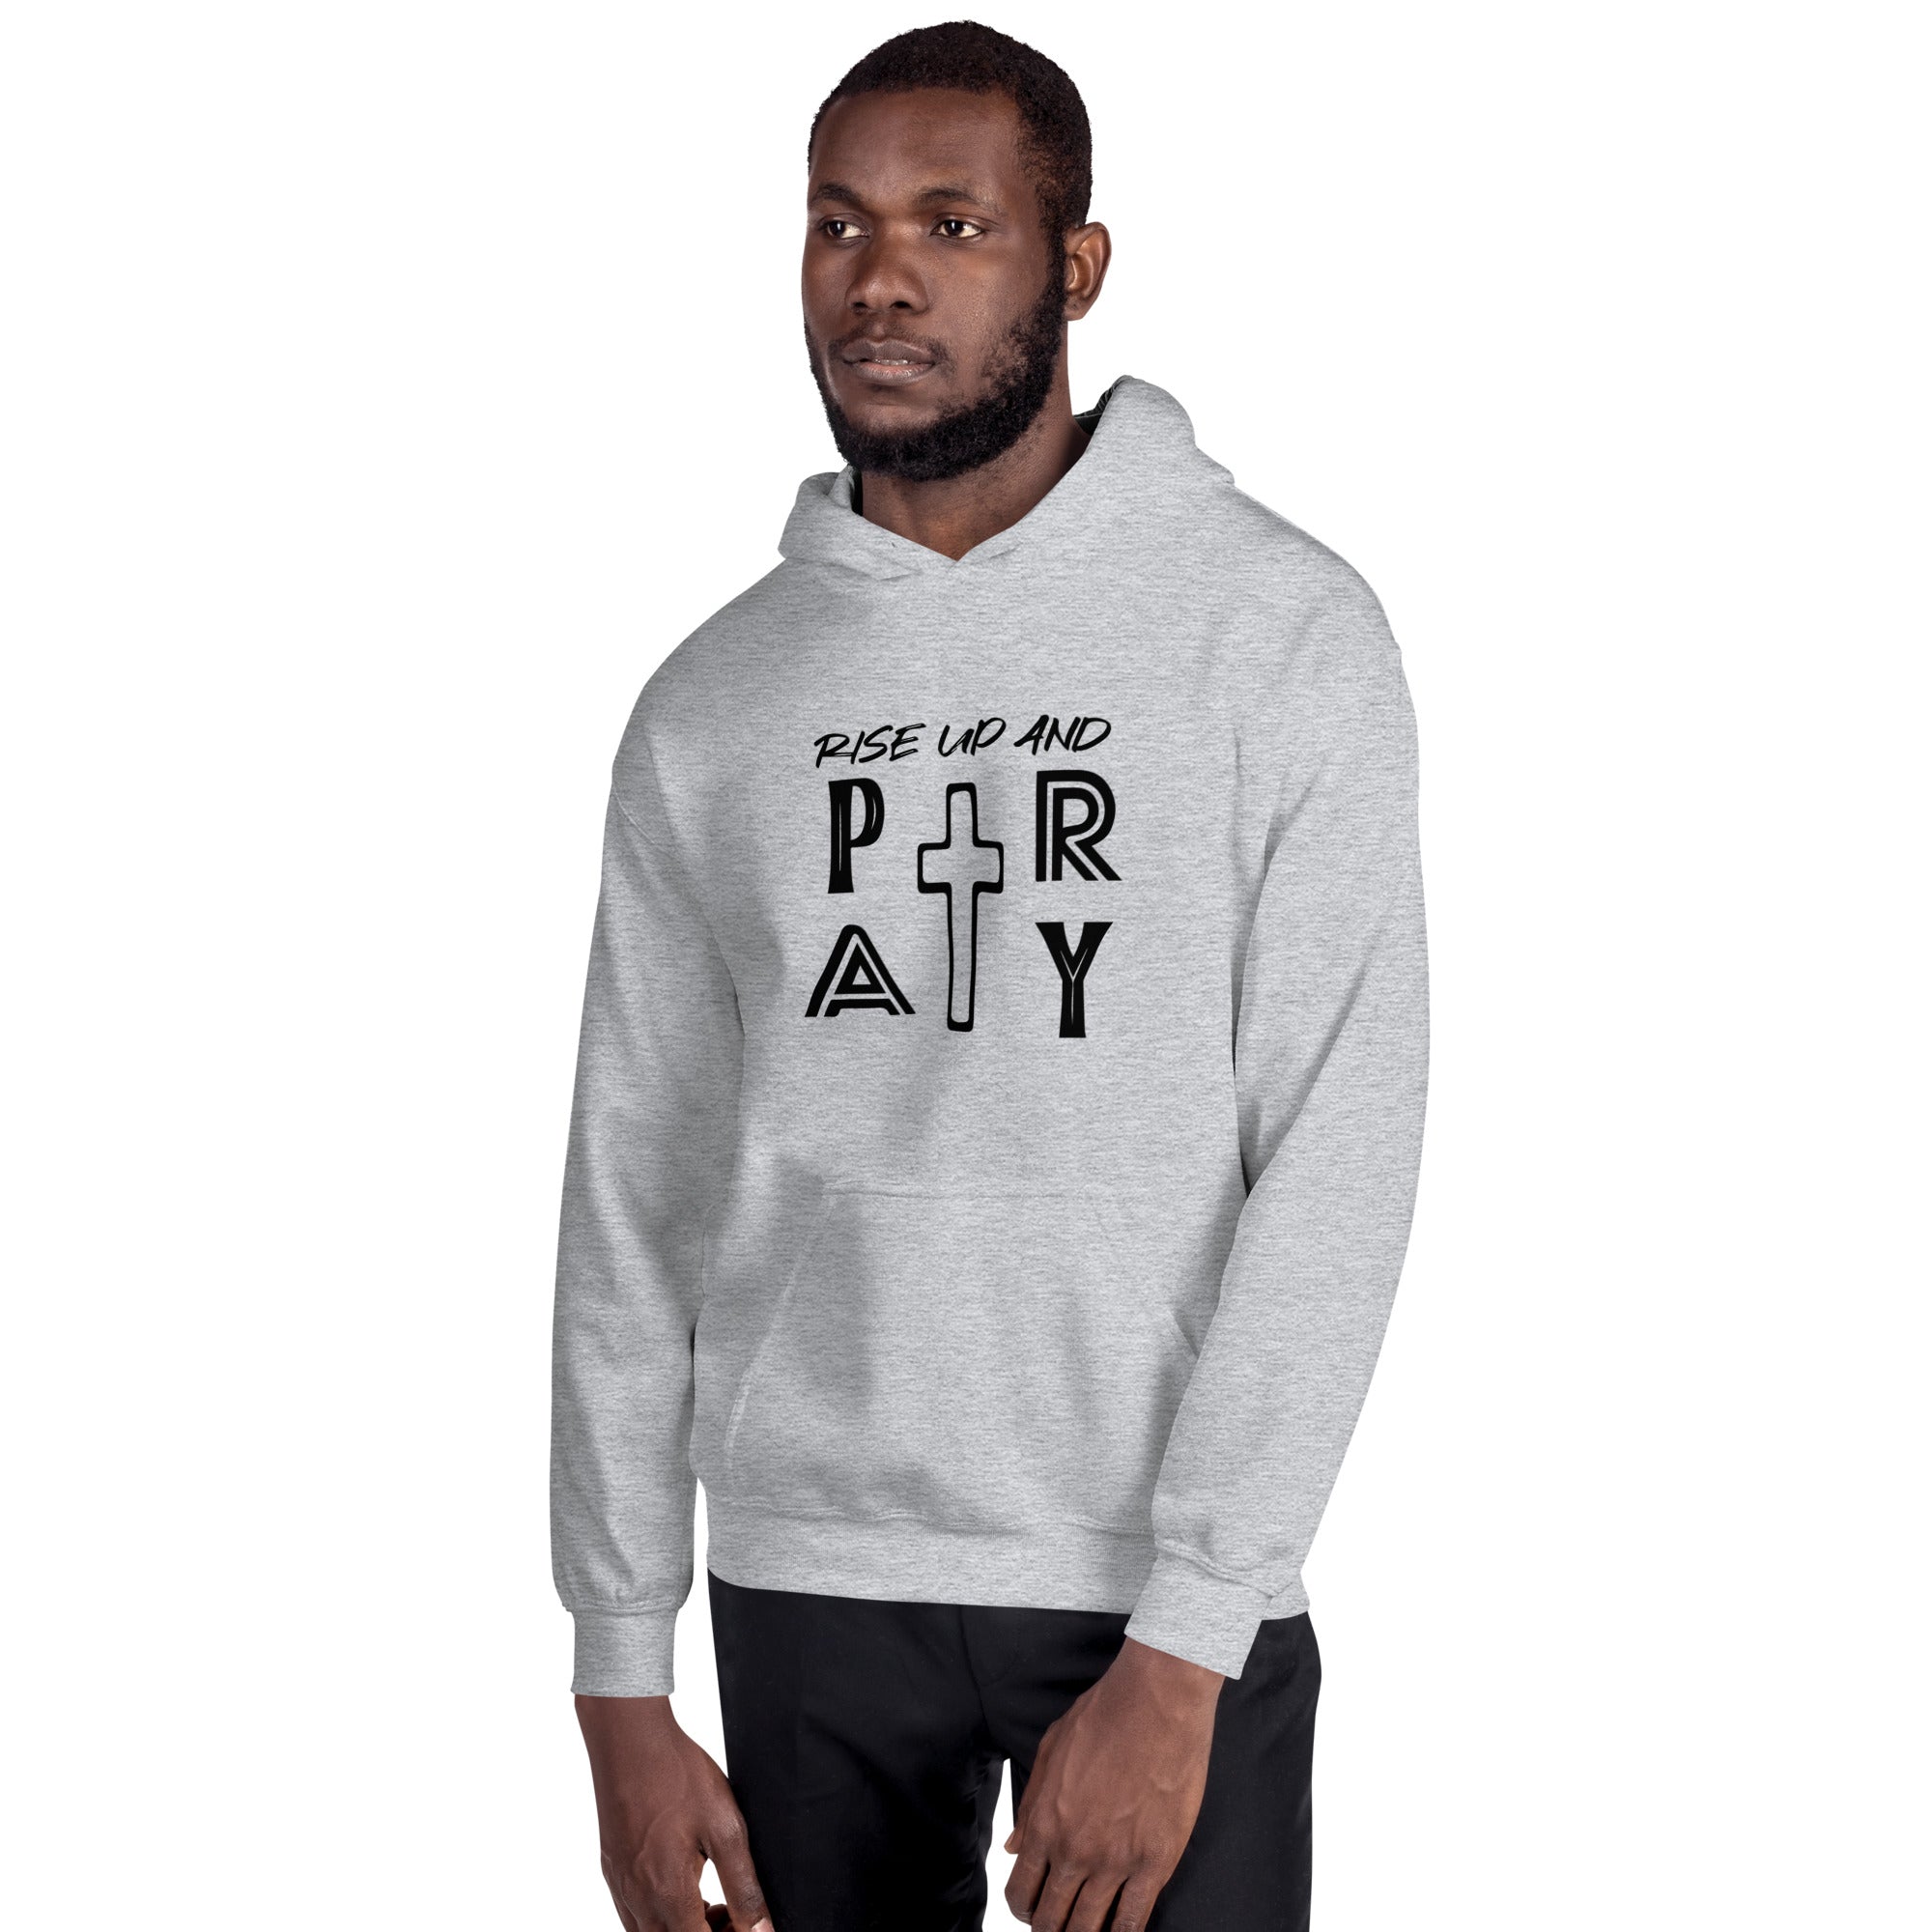 Rise Up And Pray - Unisex Hoodie